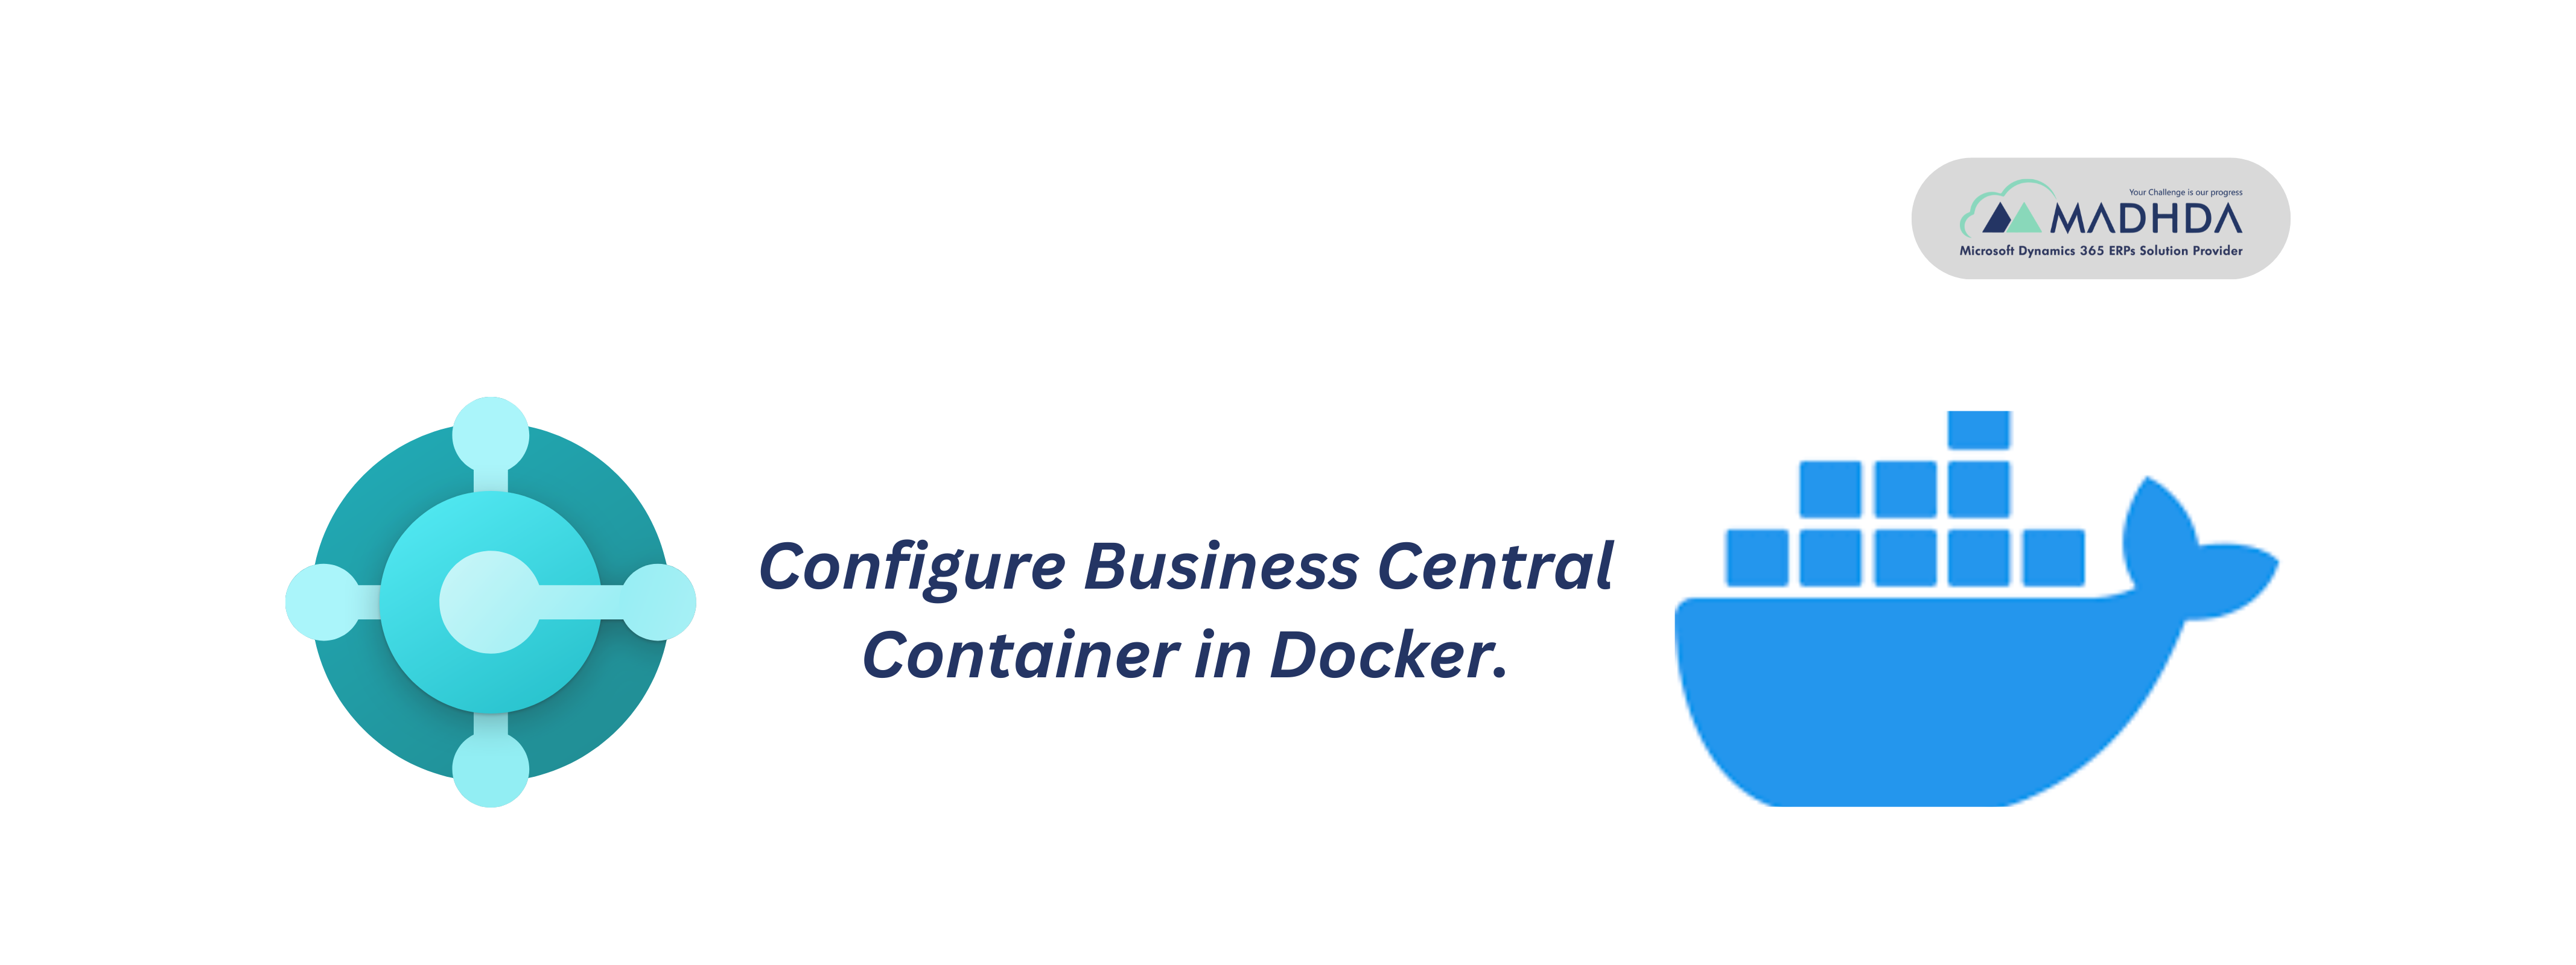 Configure Business Central Container in Docker. 01